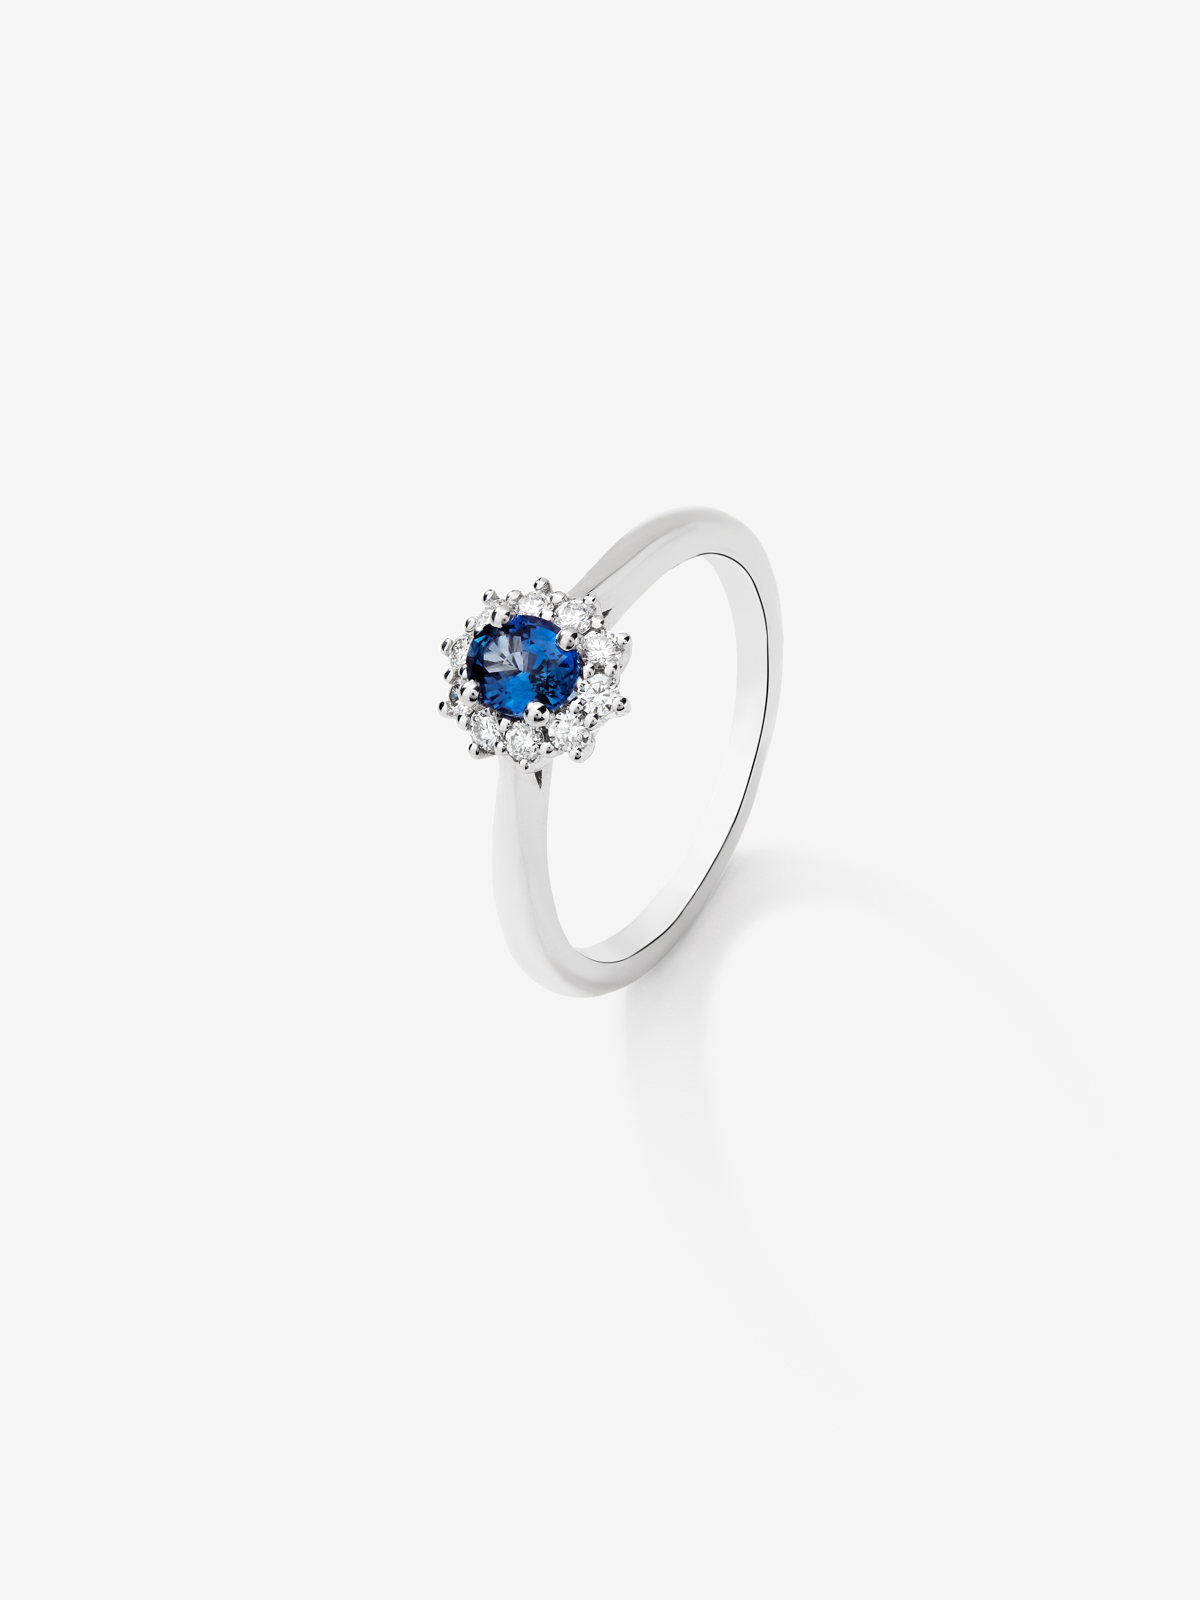 18K White Gold Ring with 0.51 CTS Blue Zafiro and Diamonds 0.18 CTS